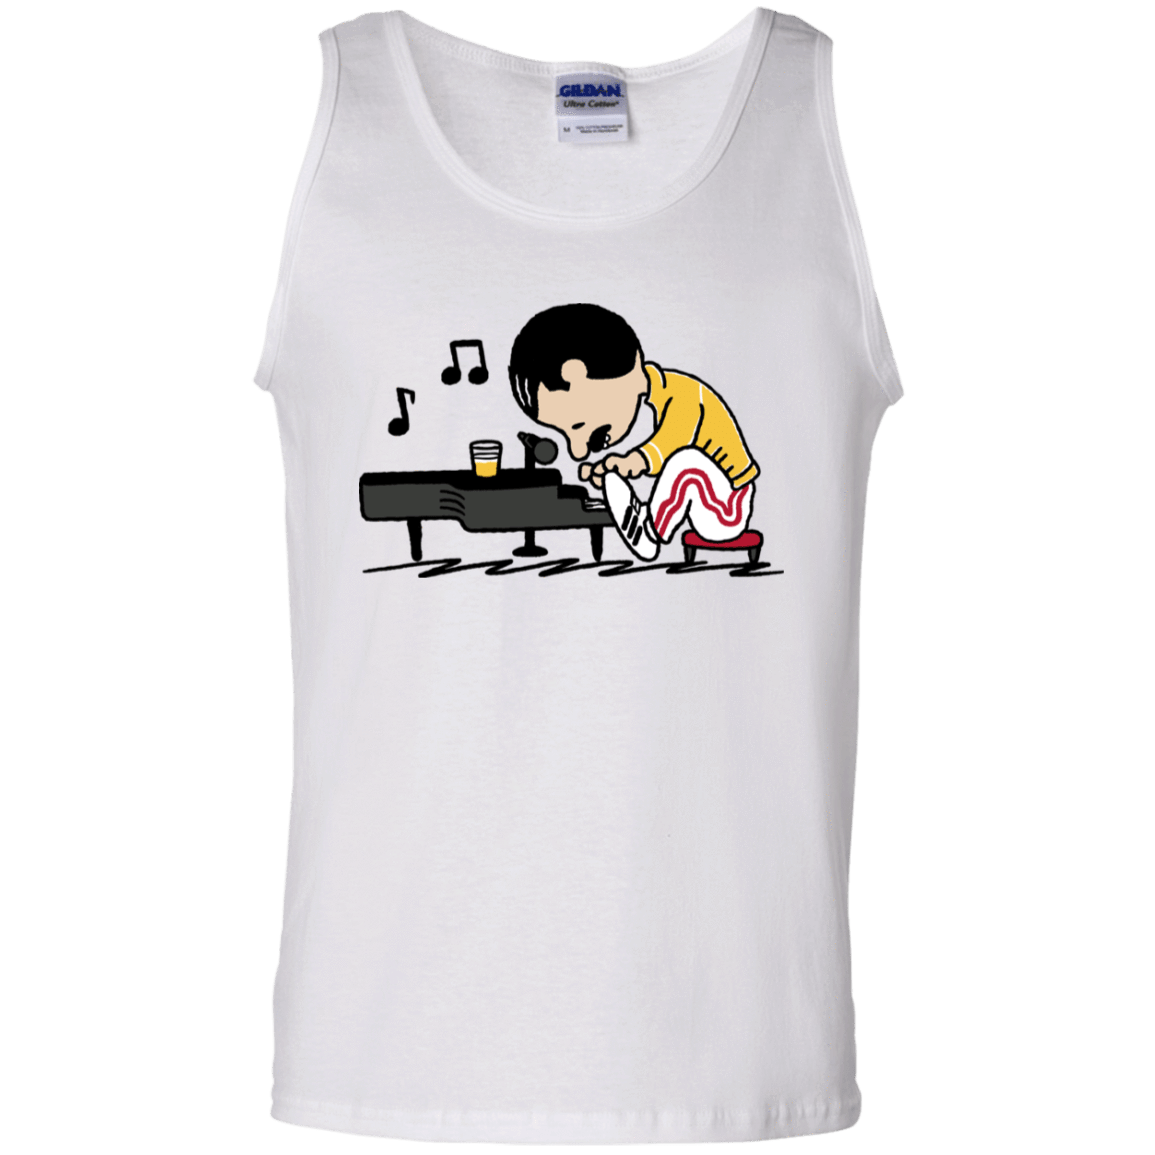 T-Shirts White / S Queenuts Men's Tank Top